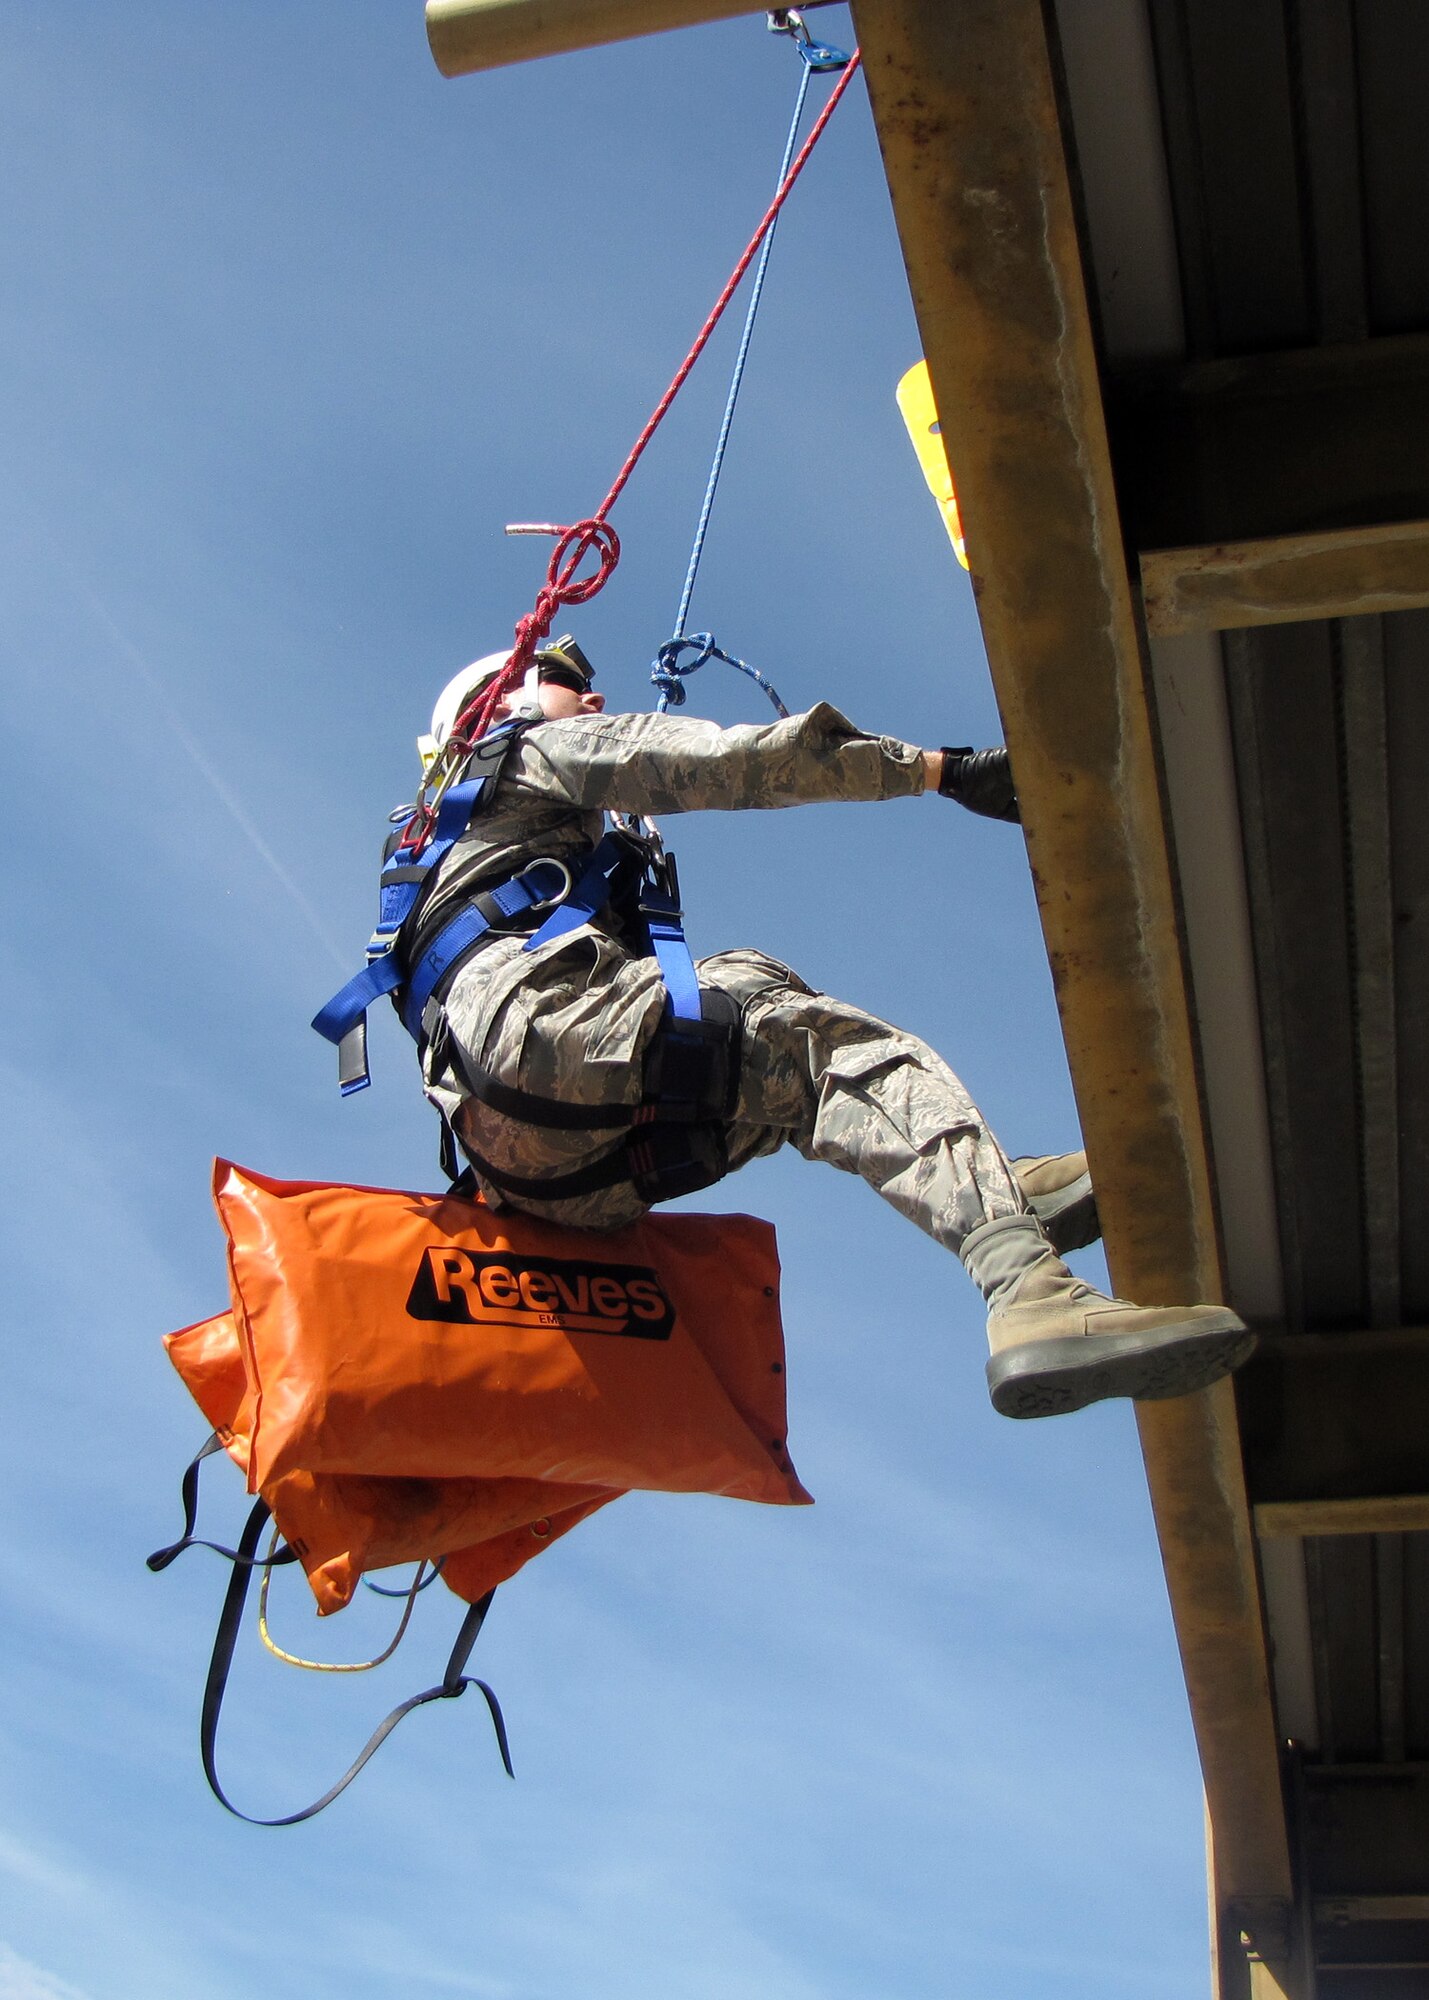 120th Fire and Emergency Services Flight Firefighter Adam Wajer repels down a training tower while transporting patient packaging materials to responders on the ground. Montana Air National Guard firefighters conducted training with the city of Great Falls firefighters at the Charles C. Carrico Regional Training Facility in Great Falls, Mont., Aug. 15-30, 2016. (Photo courtesy 120th Fire and Emergency Services Flight)